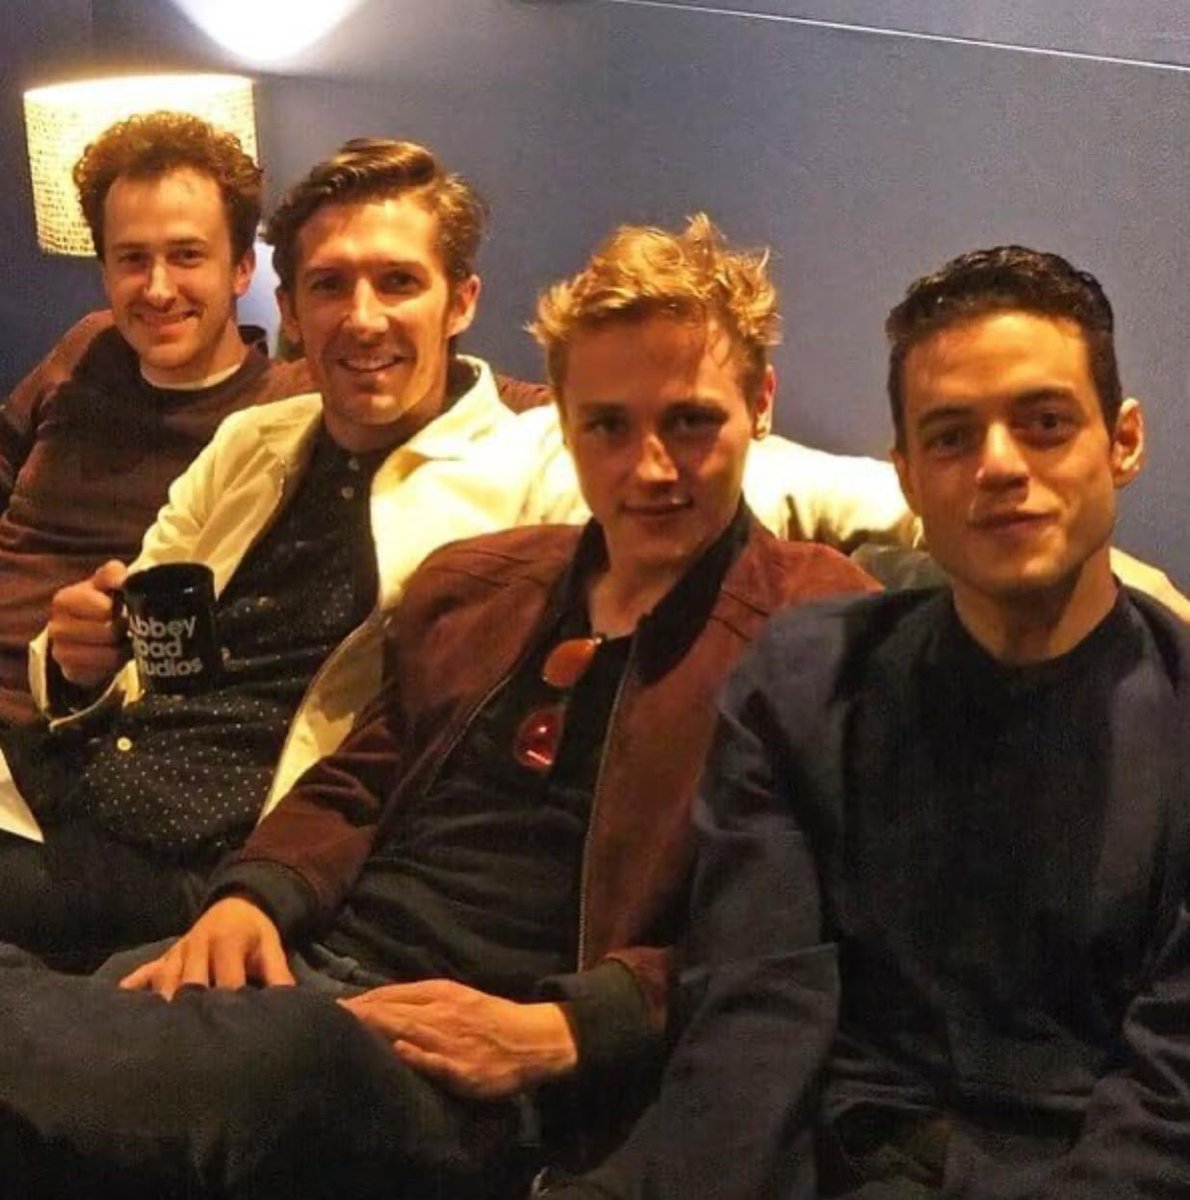 Rami Malek with his movie bandmates Joseph Mazzello, Gwilym Lee, and Ben Hardy behind the scenes on the set of 'Bohemian Rhapsody.' Malek, who won the #BestActor Oscar for his spot-on performance as legendary Queen frontman Freddie Mercury, was born on this date in 1981.